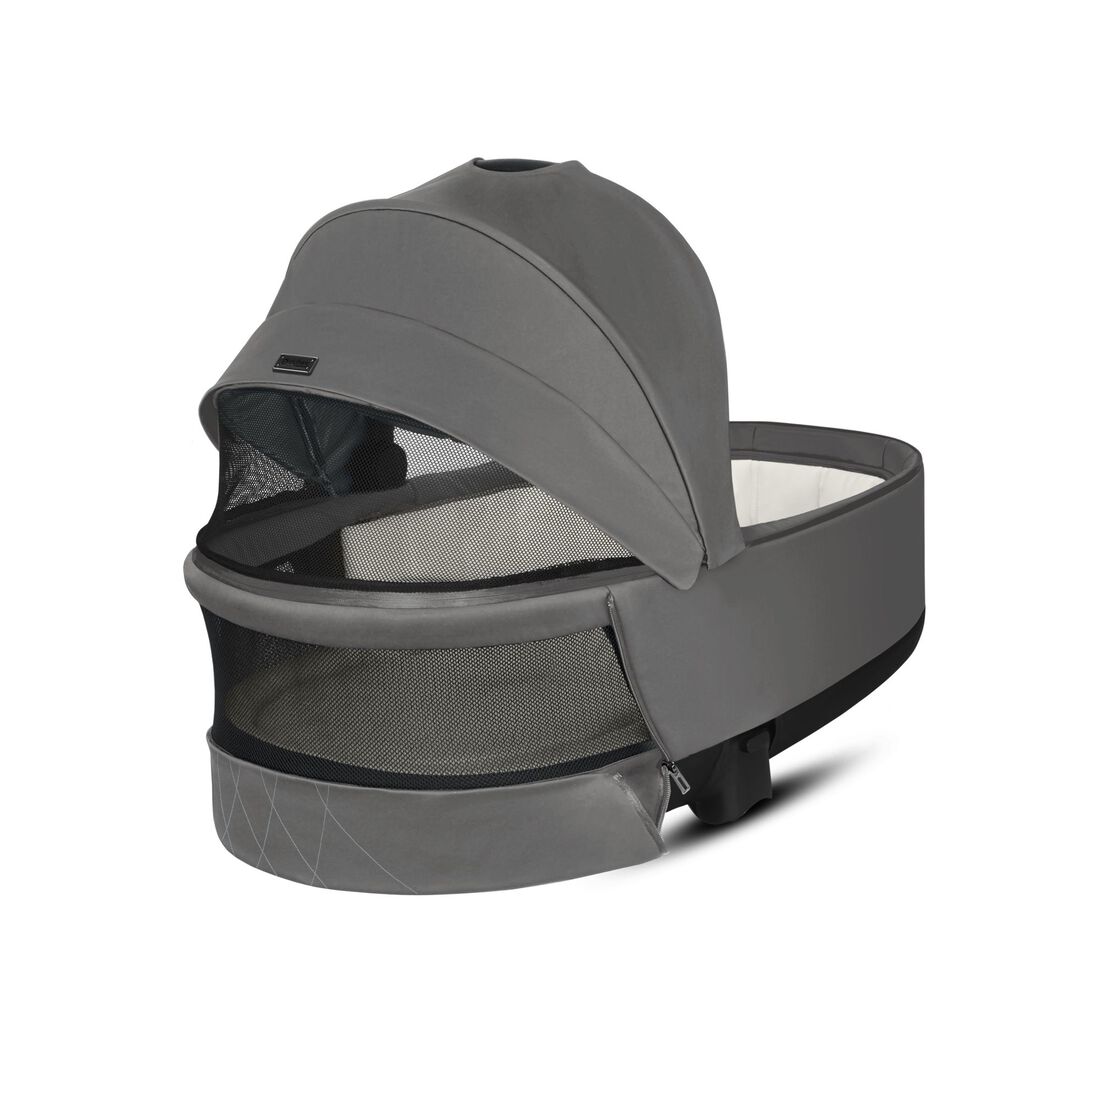 CYBEX Priam 3 Lux Carry Cot - Soho Grey in Soho Grey large image number 4